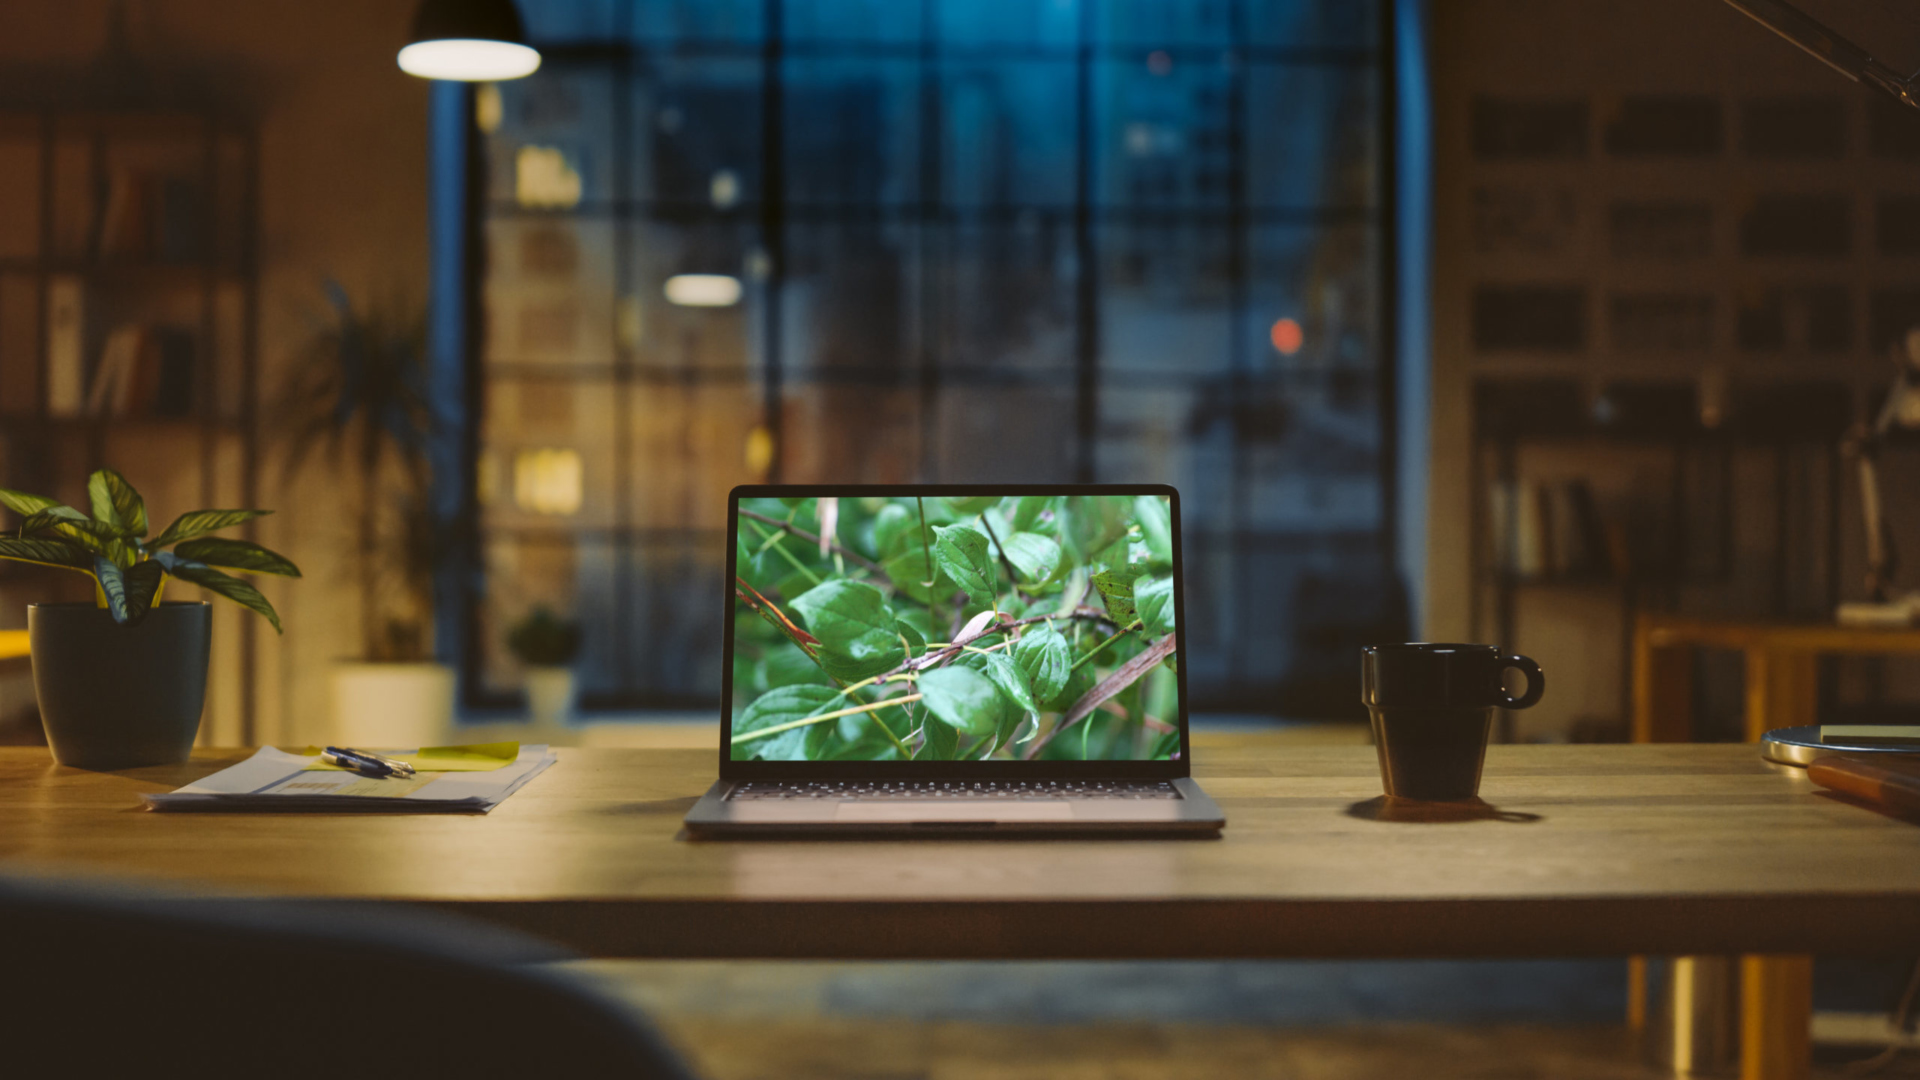 Photograph of a desk and laptop screen displaying digital content from the Invasive Species class featuring a photo of invasive buckthorn leaves